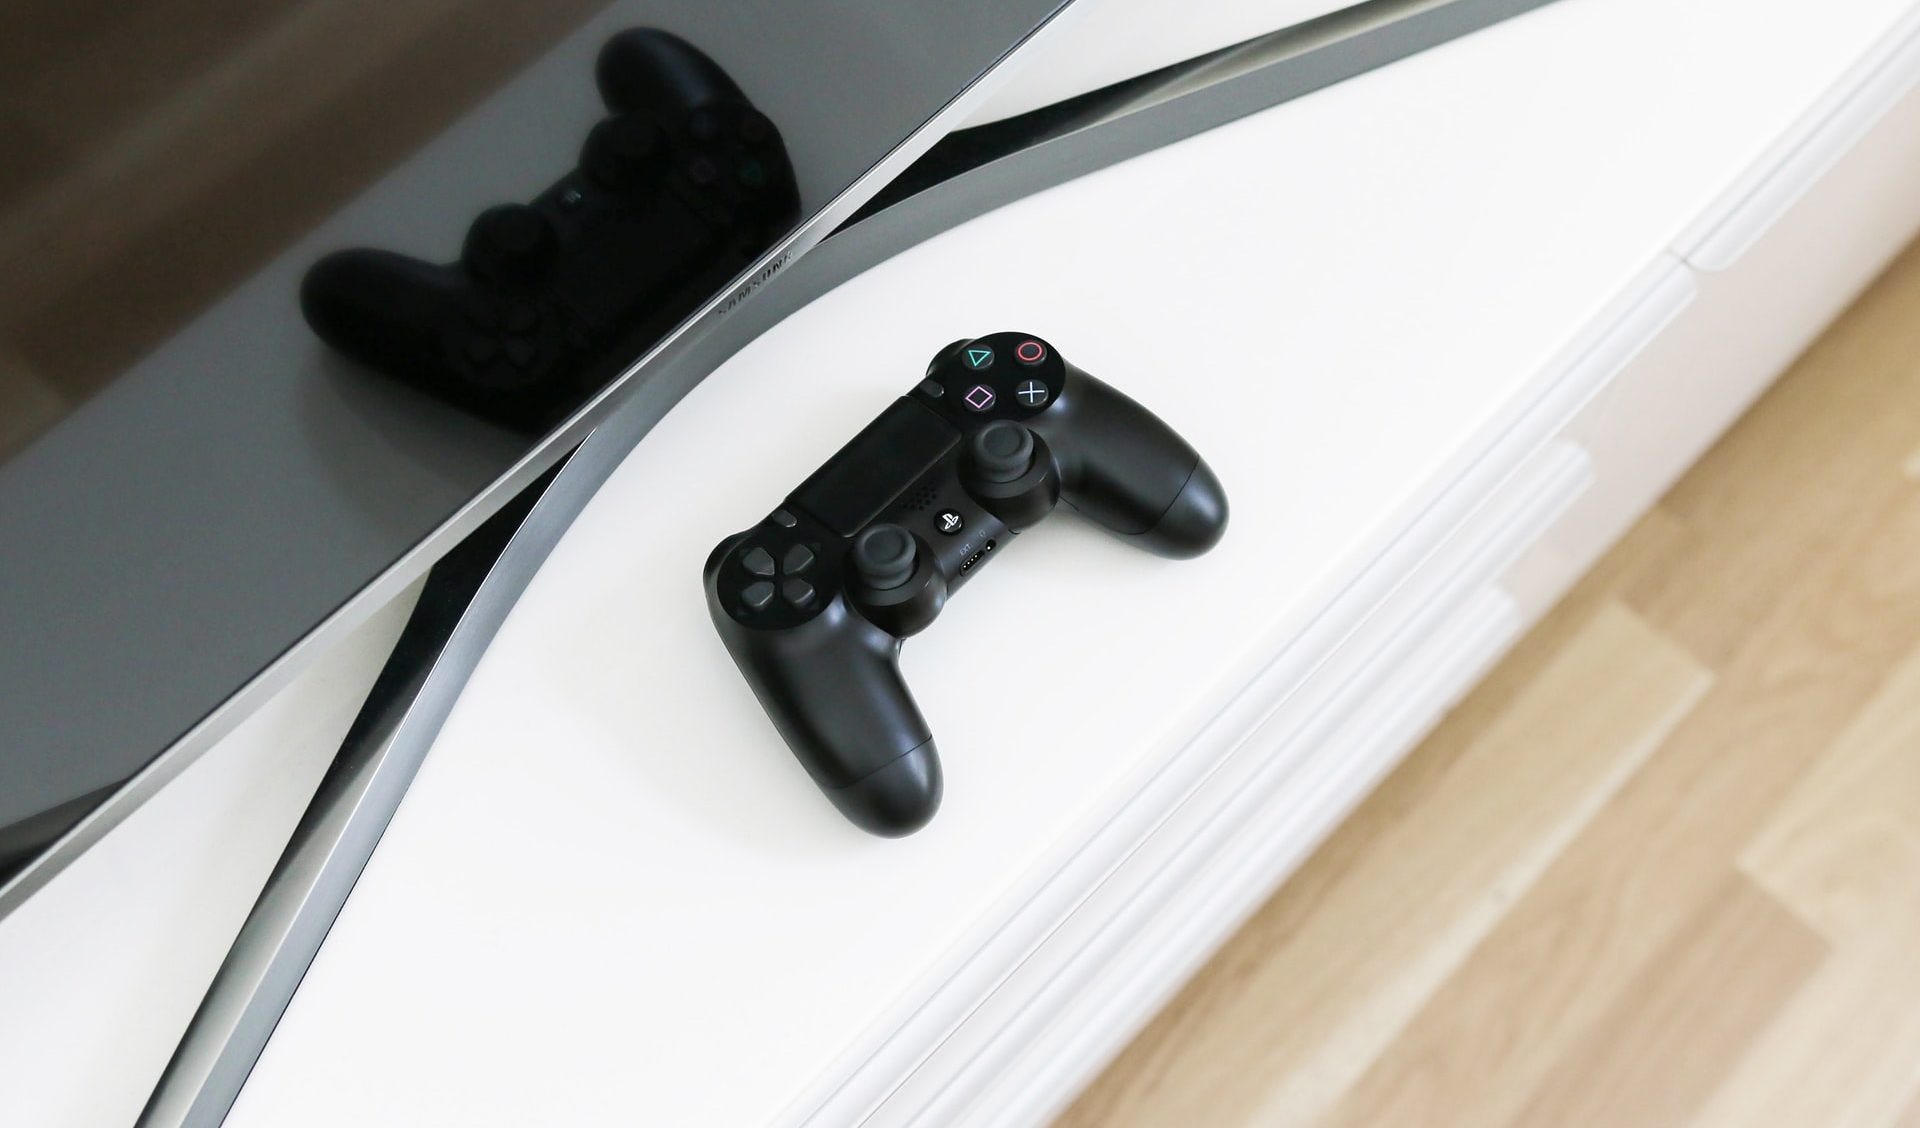 verdamping Misverstand Drank How to Connect a PS4 Controller to PC: a Step-by-step Guide - 42West